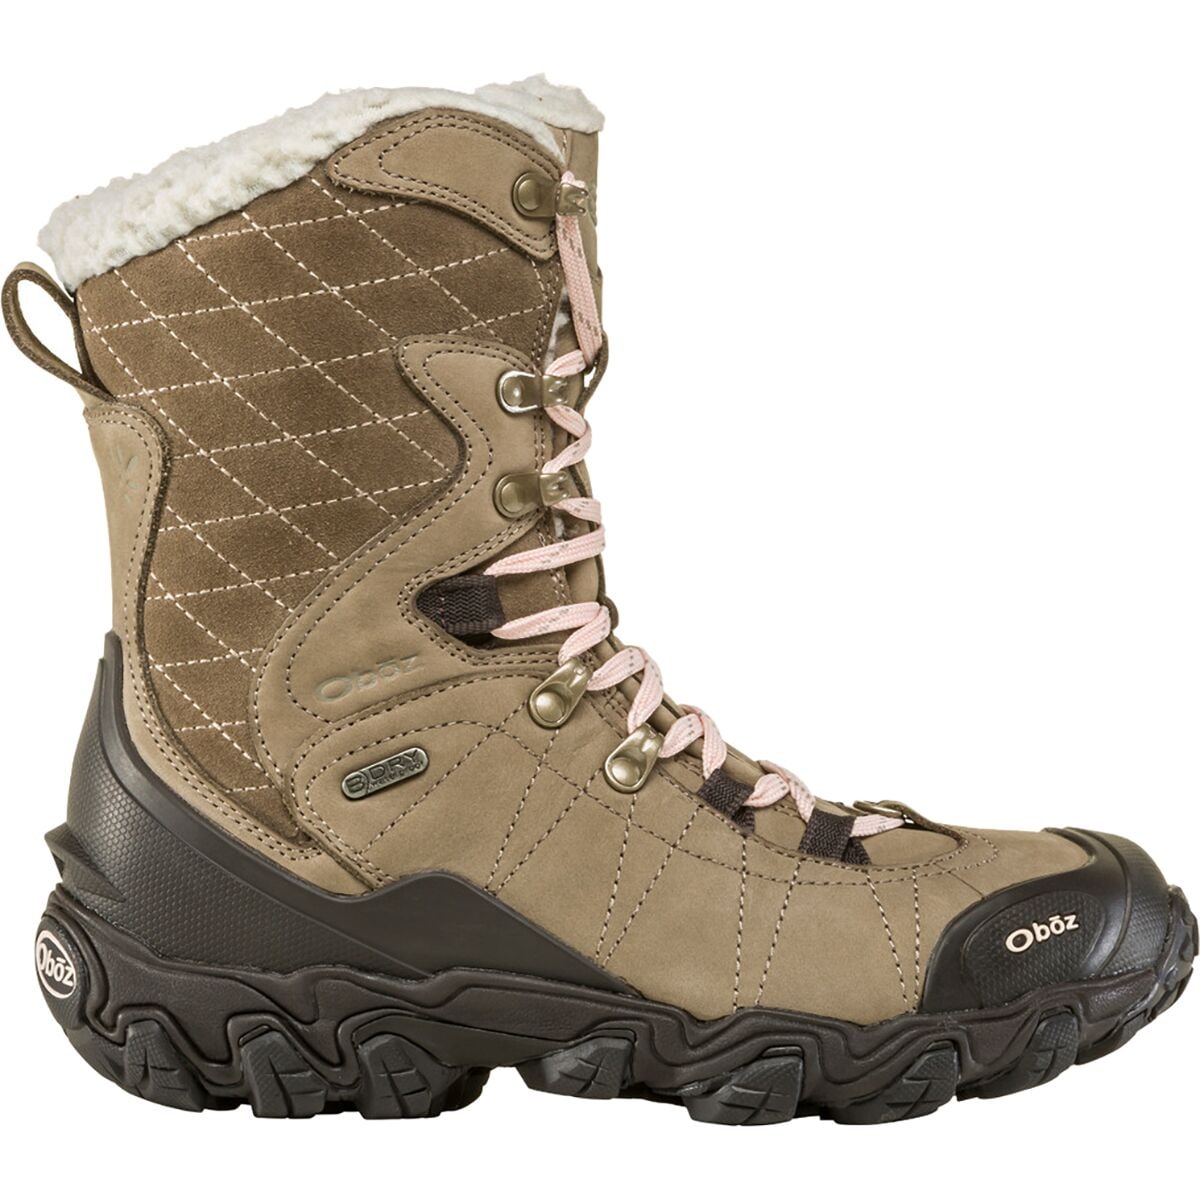 Oboz Bridger 9in Insulated B-Dry Wide Boot - Women's